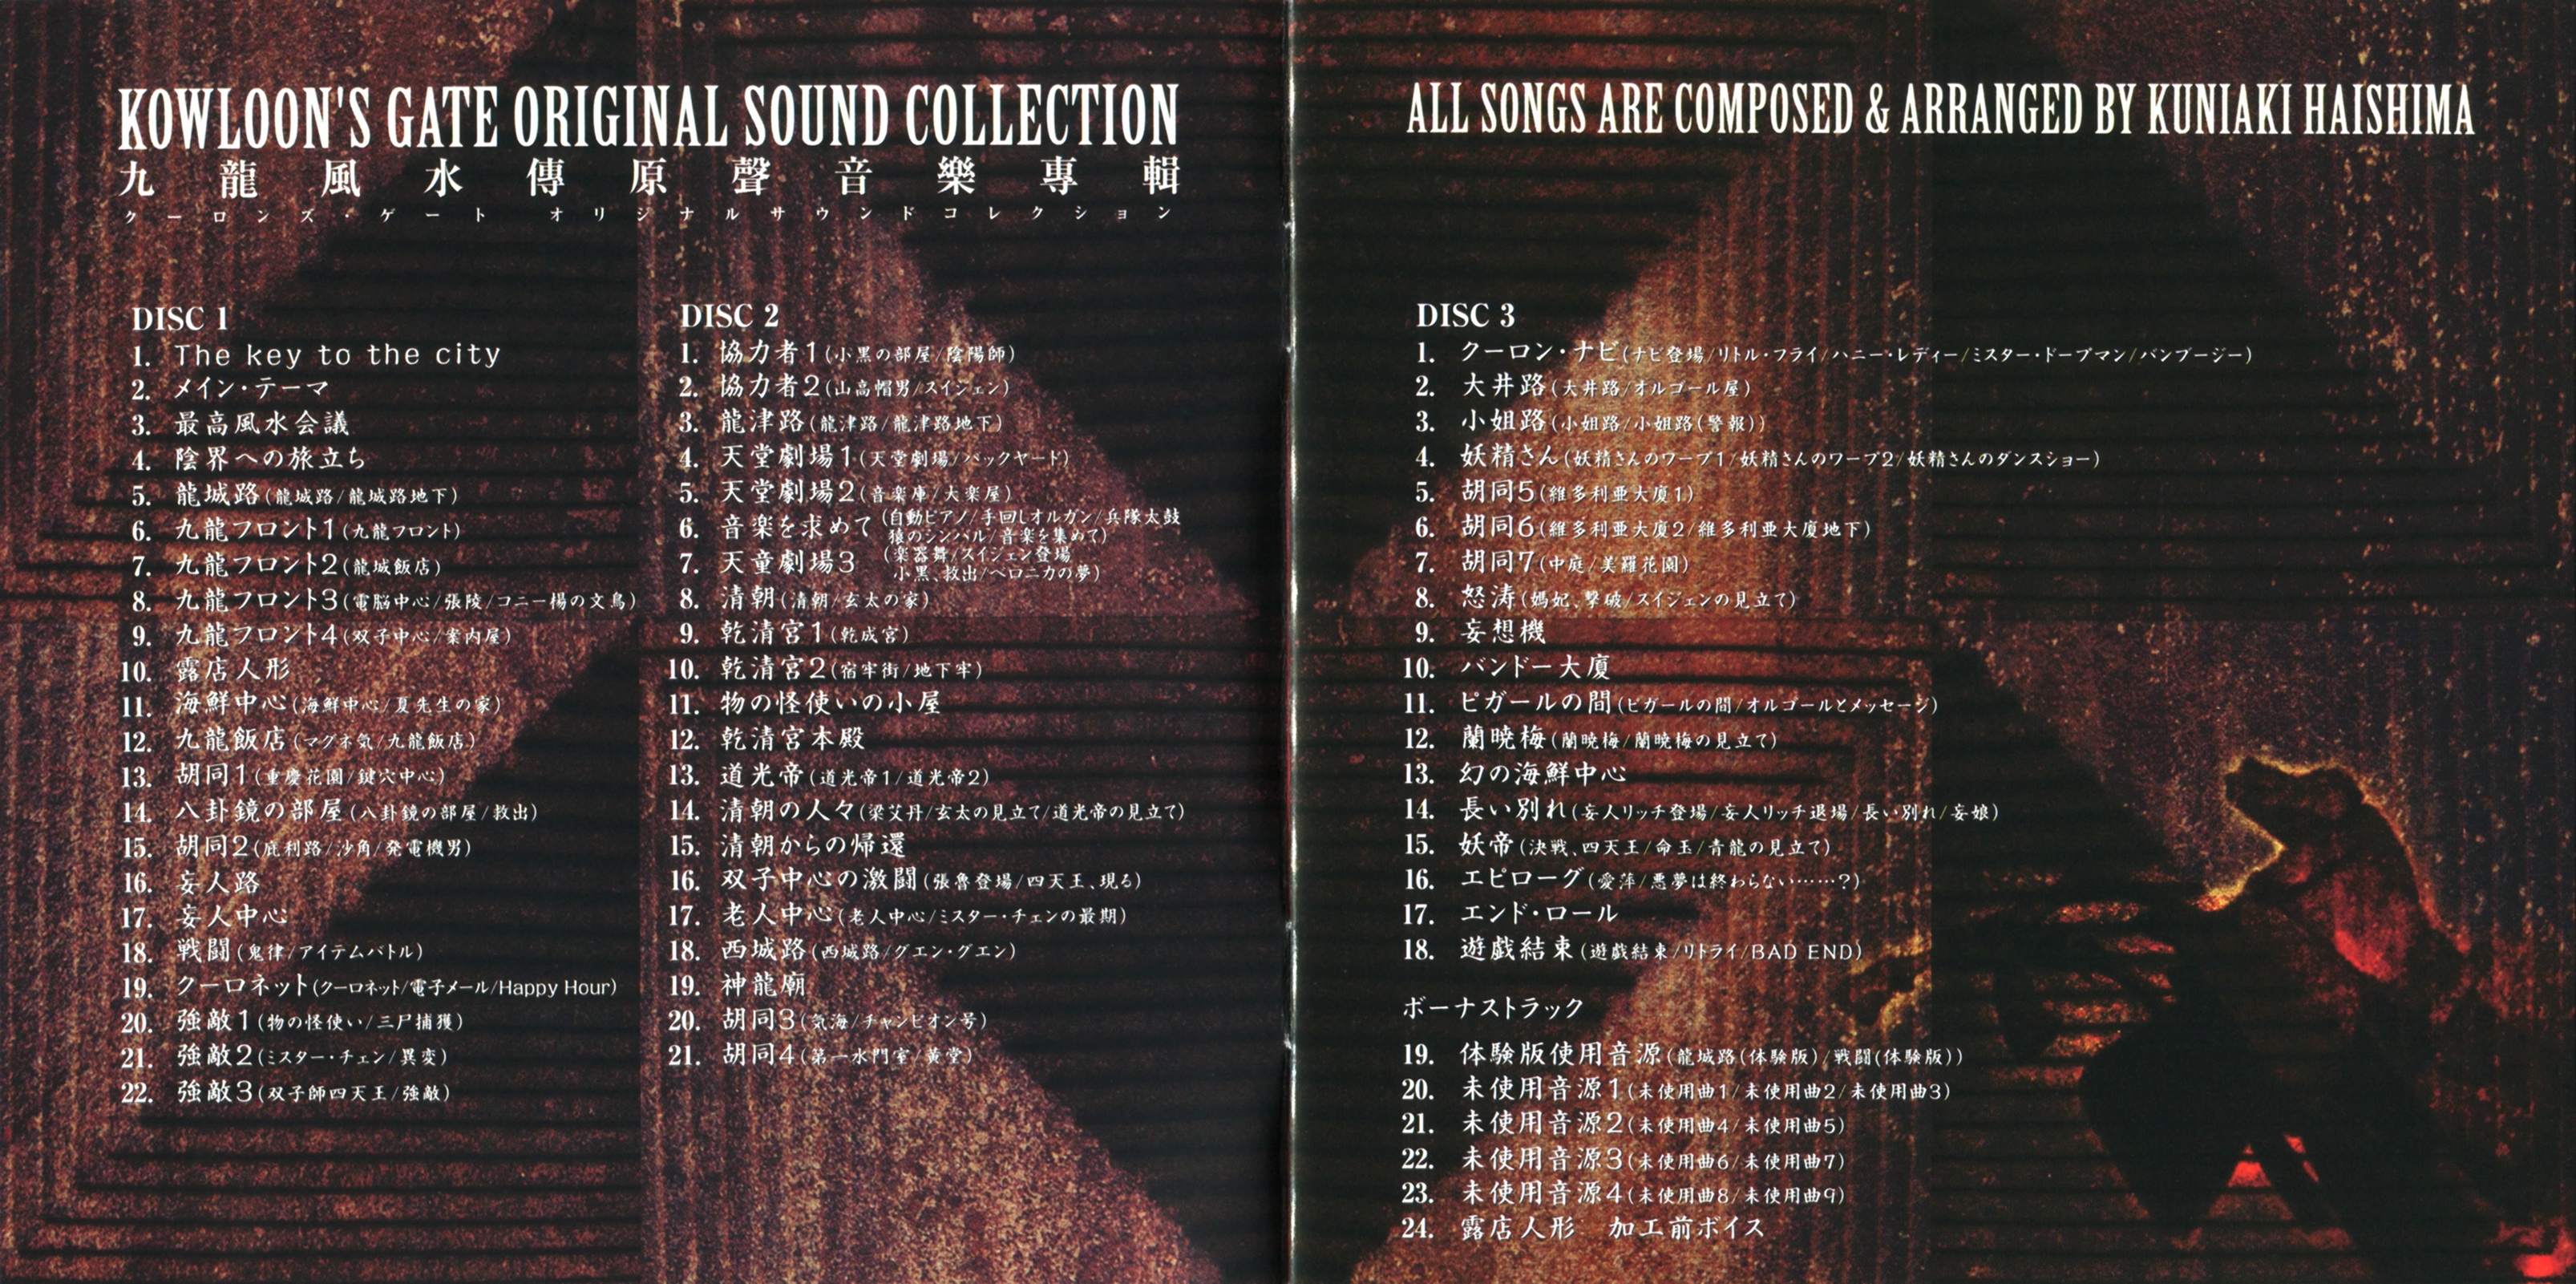 KOWLOON'S GATE ORIGINAL SOUND COLLECTION (2014) MP3 - Download KOWLOON'S  GATE ORIGINAL SOUND COLLECTION (2014) Soundtracks for FREE!